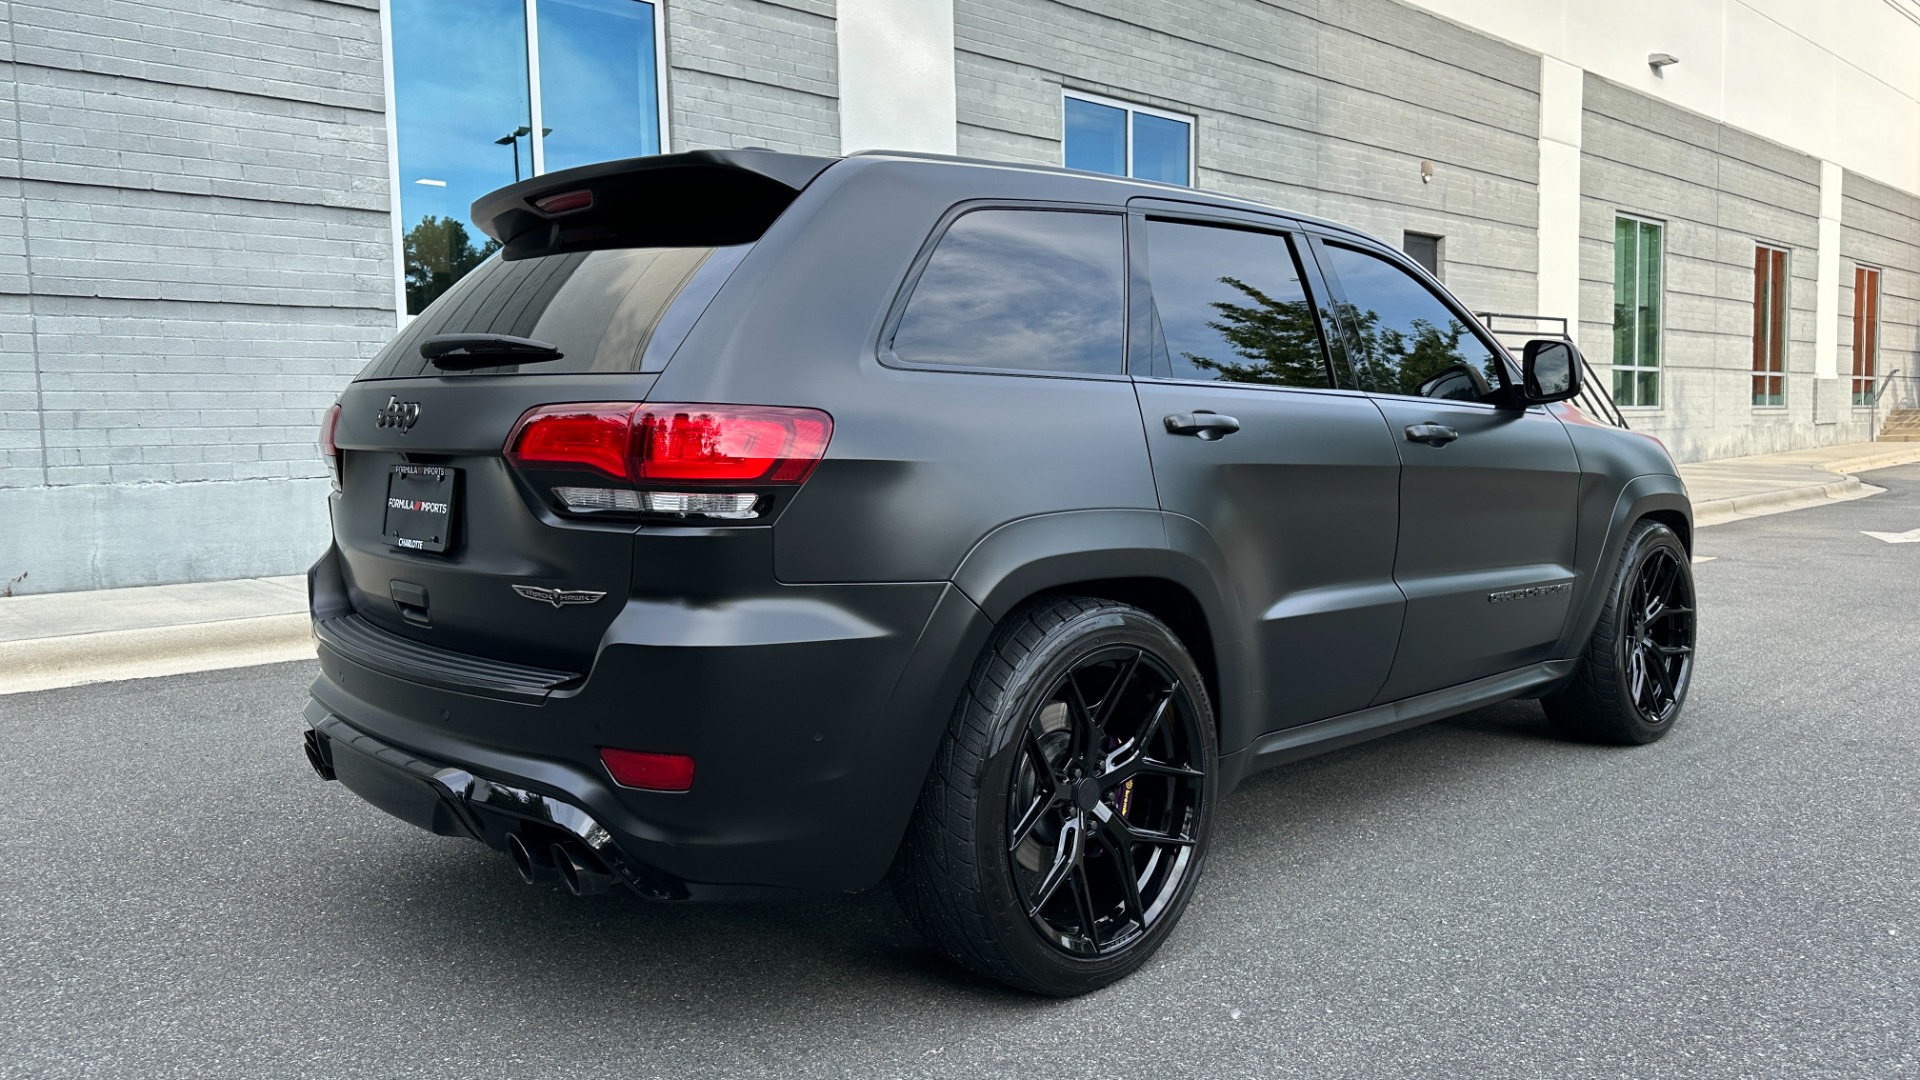 Used 2021 Jeep Grand Cherokee TRACKHAWK / SUPERCHARGED / STARLIGHT HEADLINER / VOSSEN WHEELS for sale $90,495 at Formula Imports in Charlotte NC 28227 4